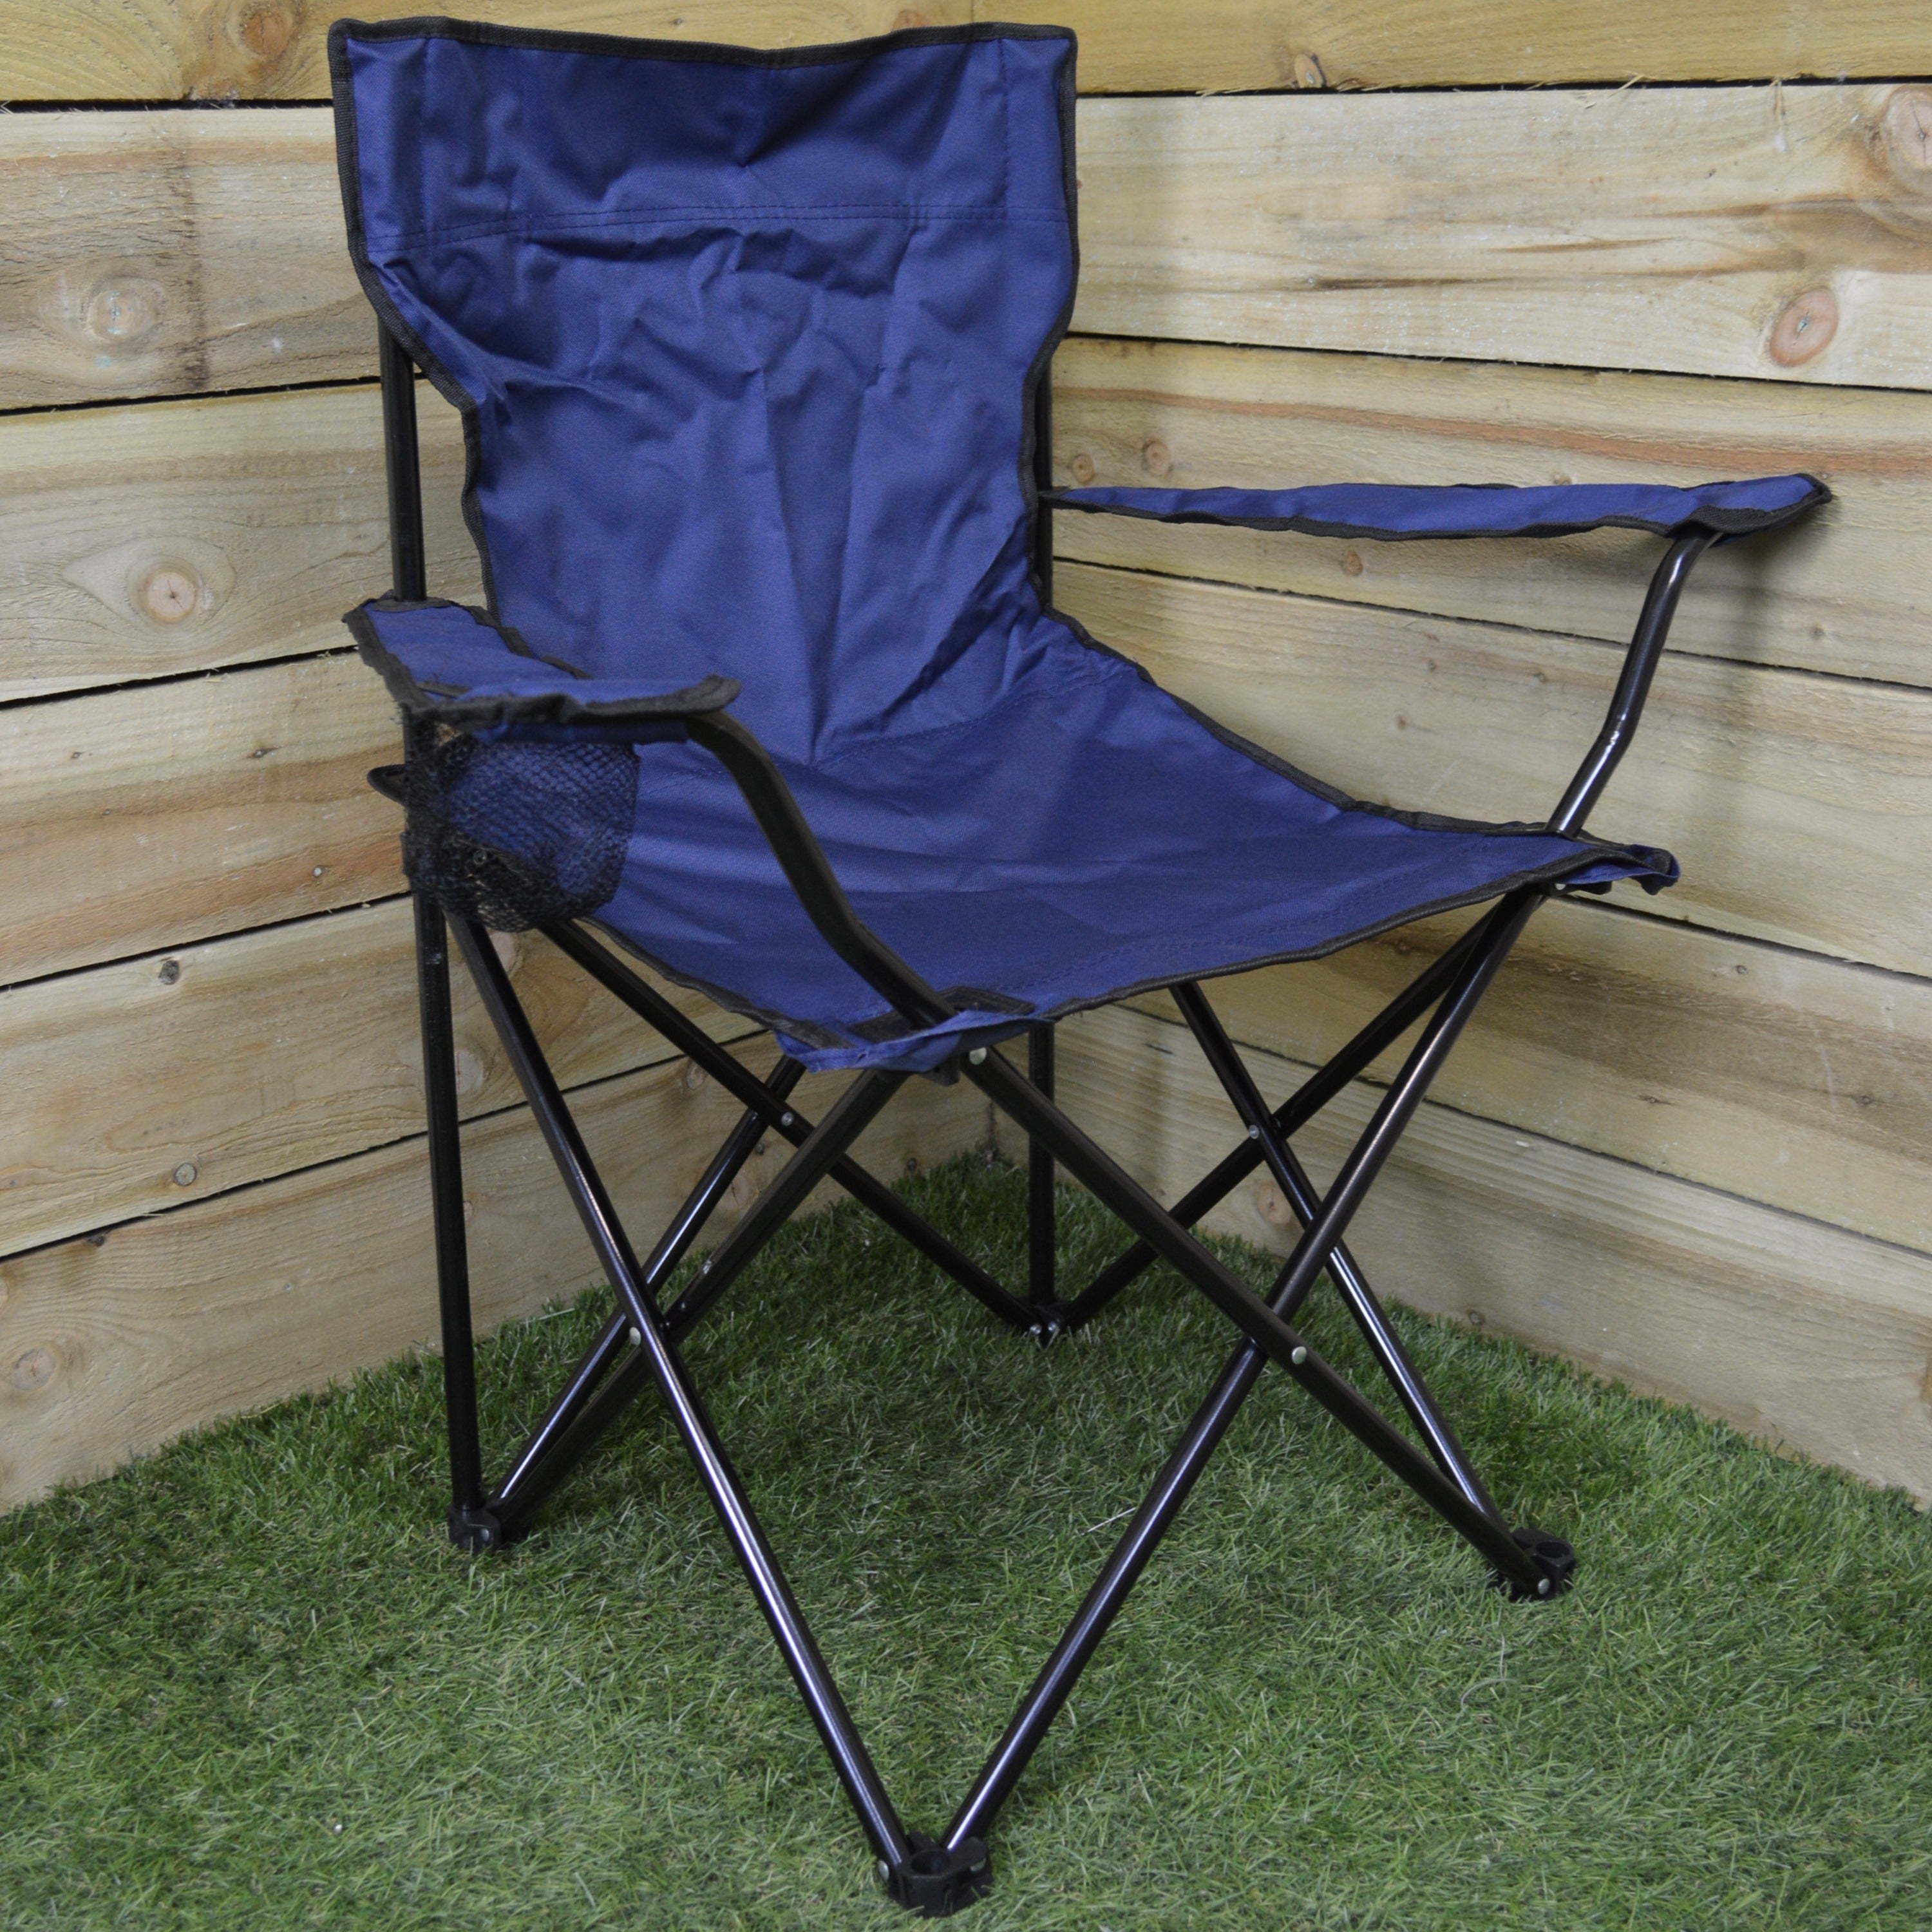 Blue Folding Canvas Camping / Festival / Outdoor Chair with Arms and Cup Holder